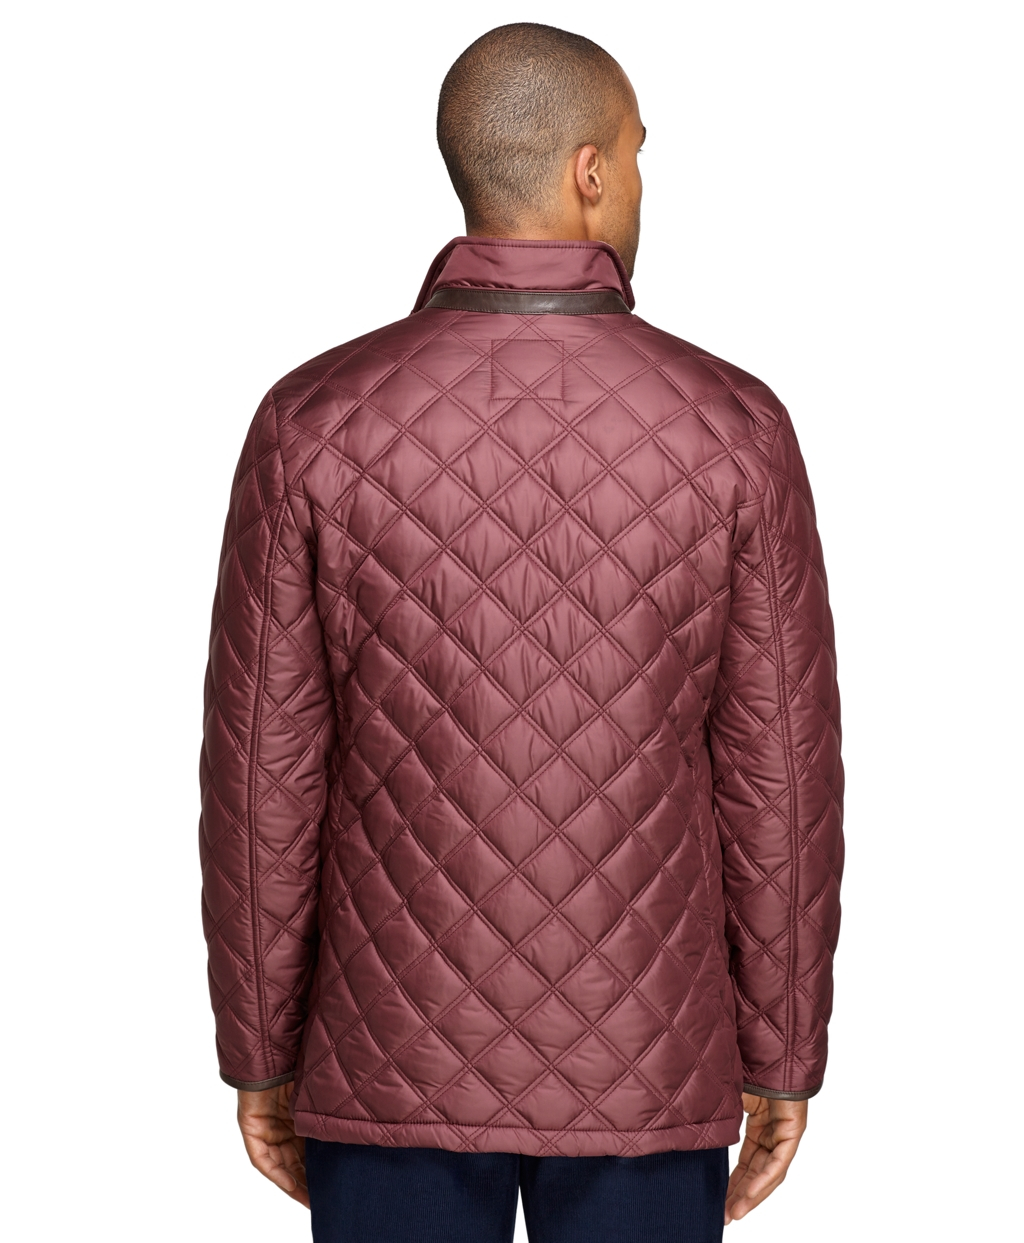 Brooks Brothers Quilted Jacket in Burgundy (Red) for Men - Lyst